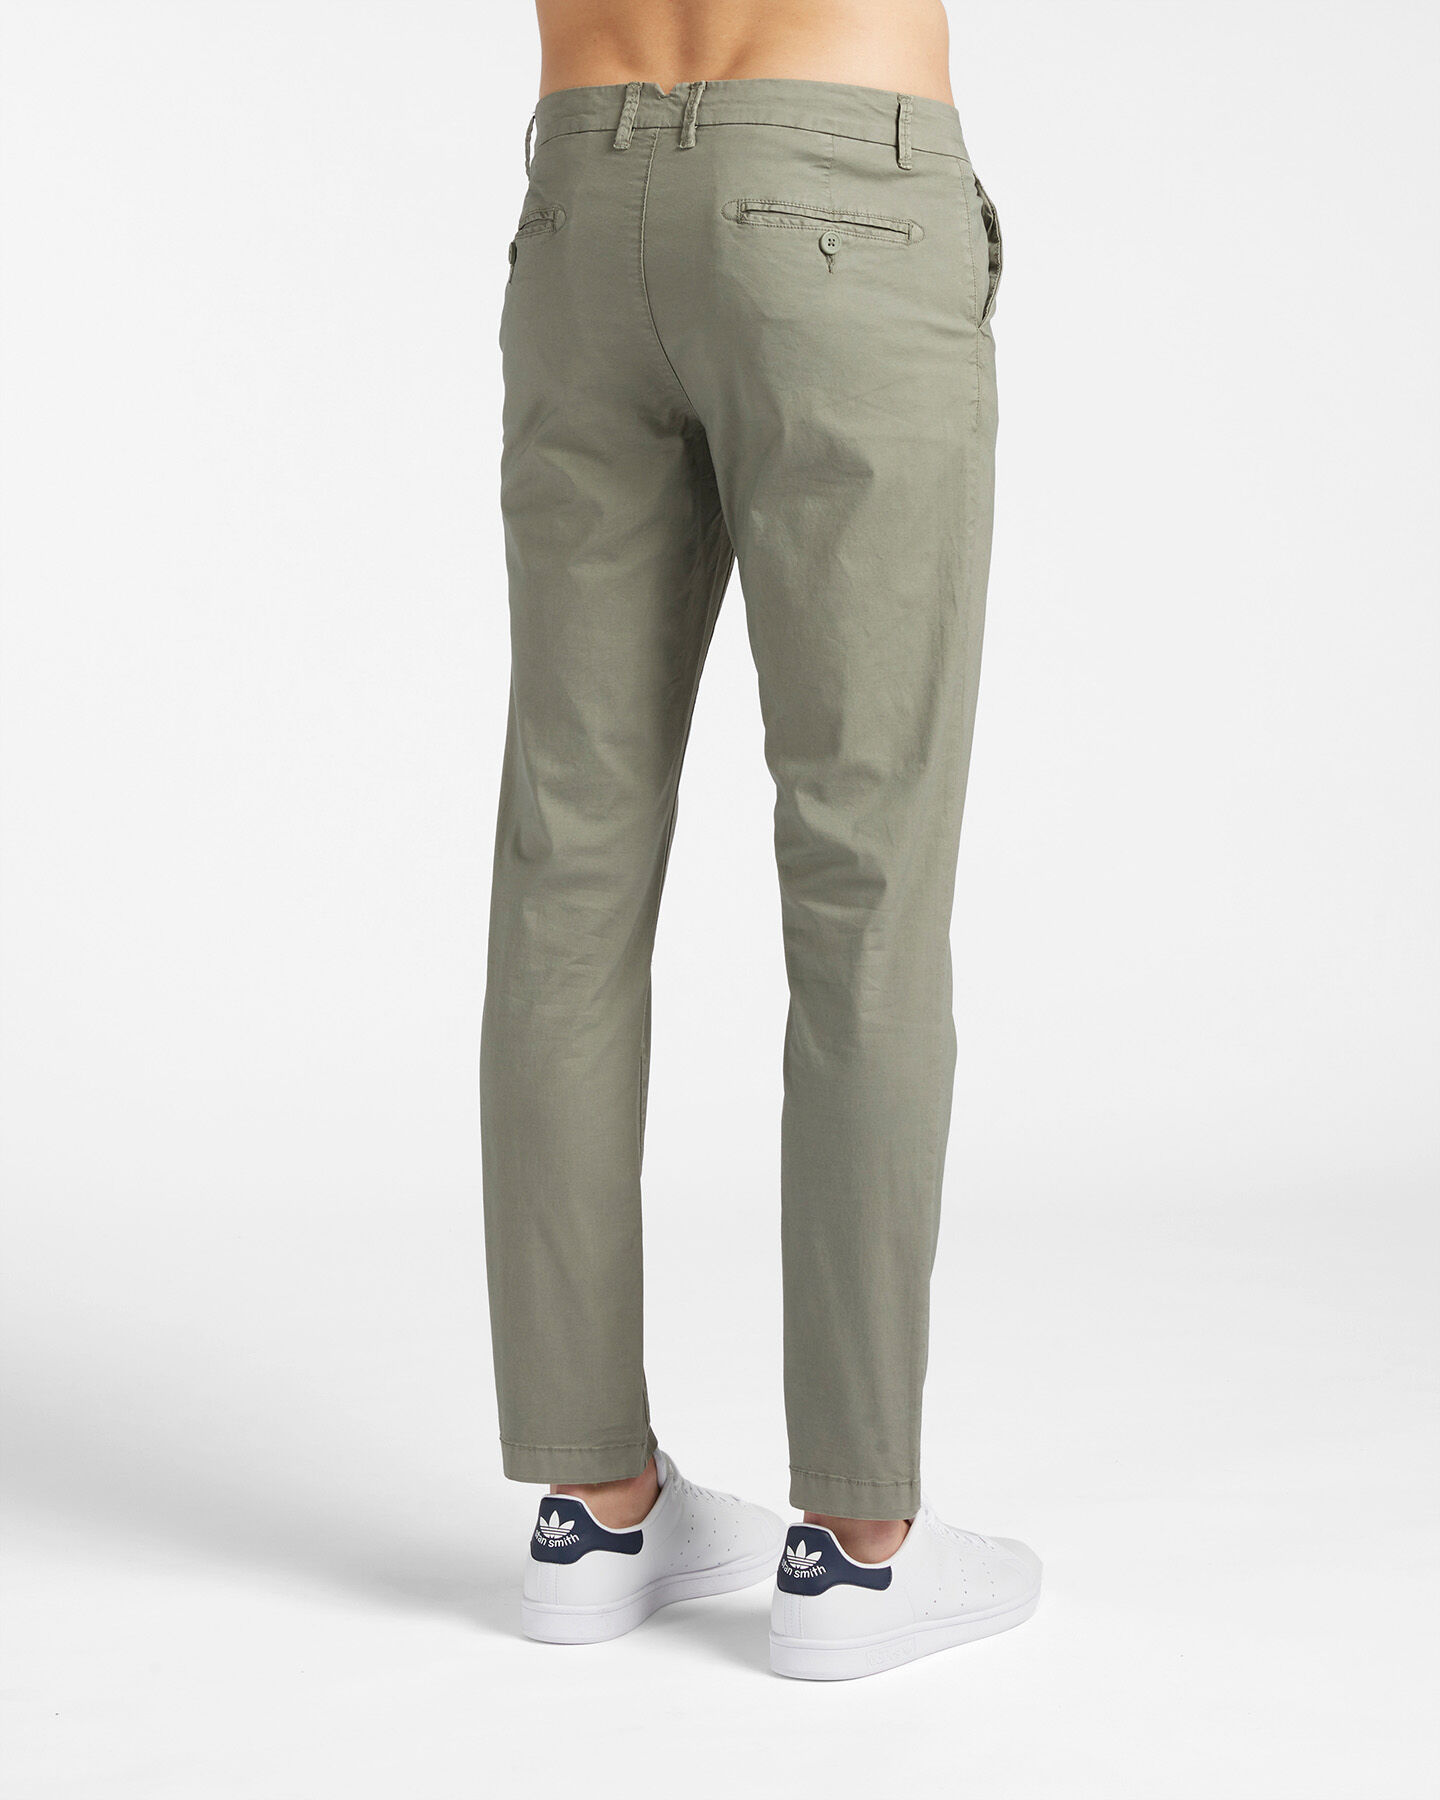  Pantalone DACK'S BASIC COLLECTION M S4118694|1039|56 scatto 1